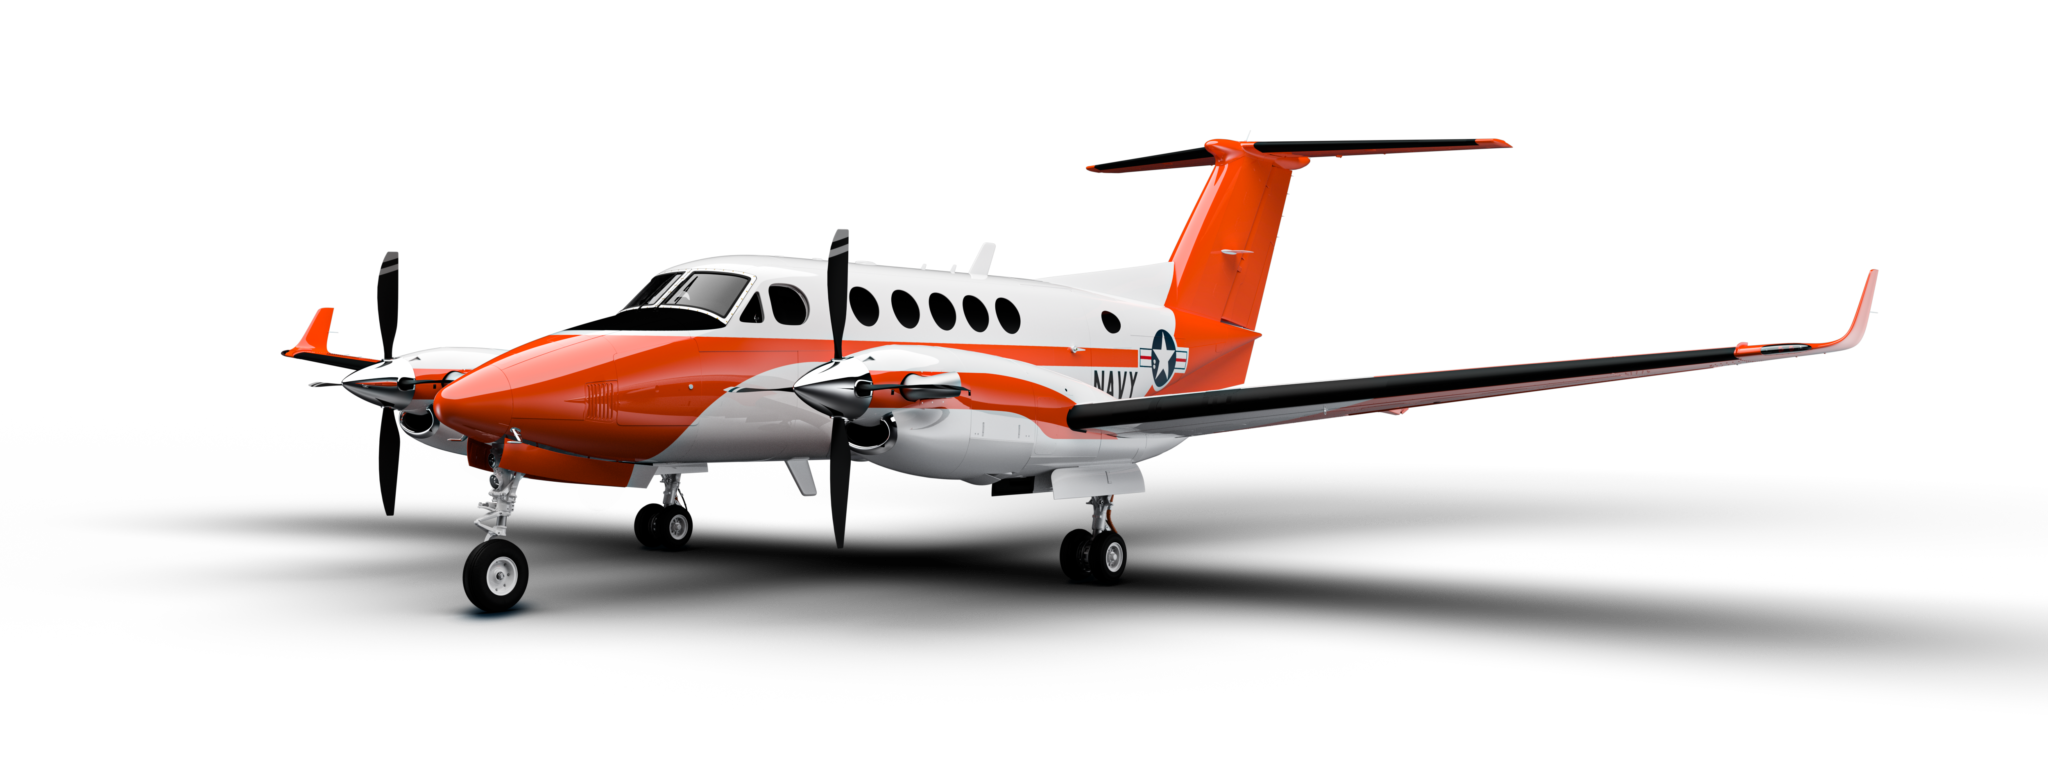 Textron Aviation Special Missions Beechcraft King Air 260 chosen as new U.S. Navy Multi-Engine Training System (METS)